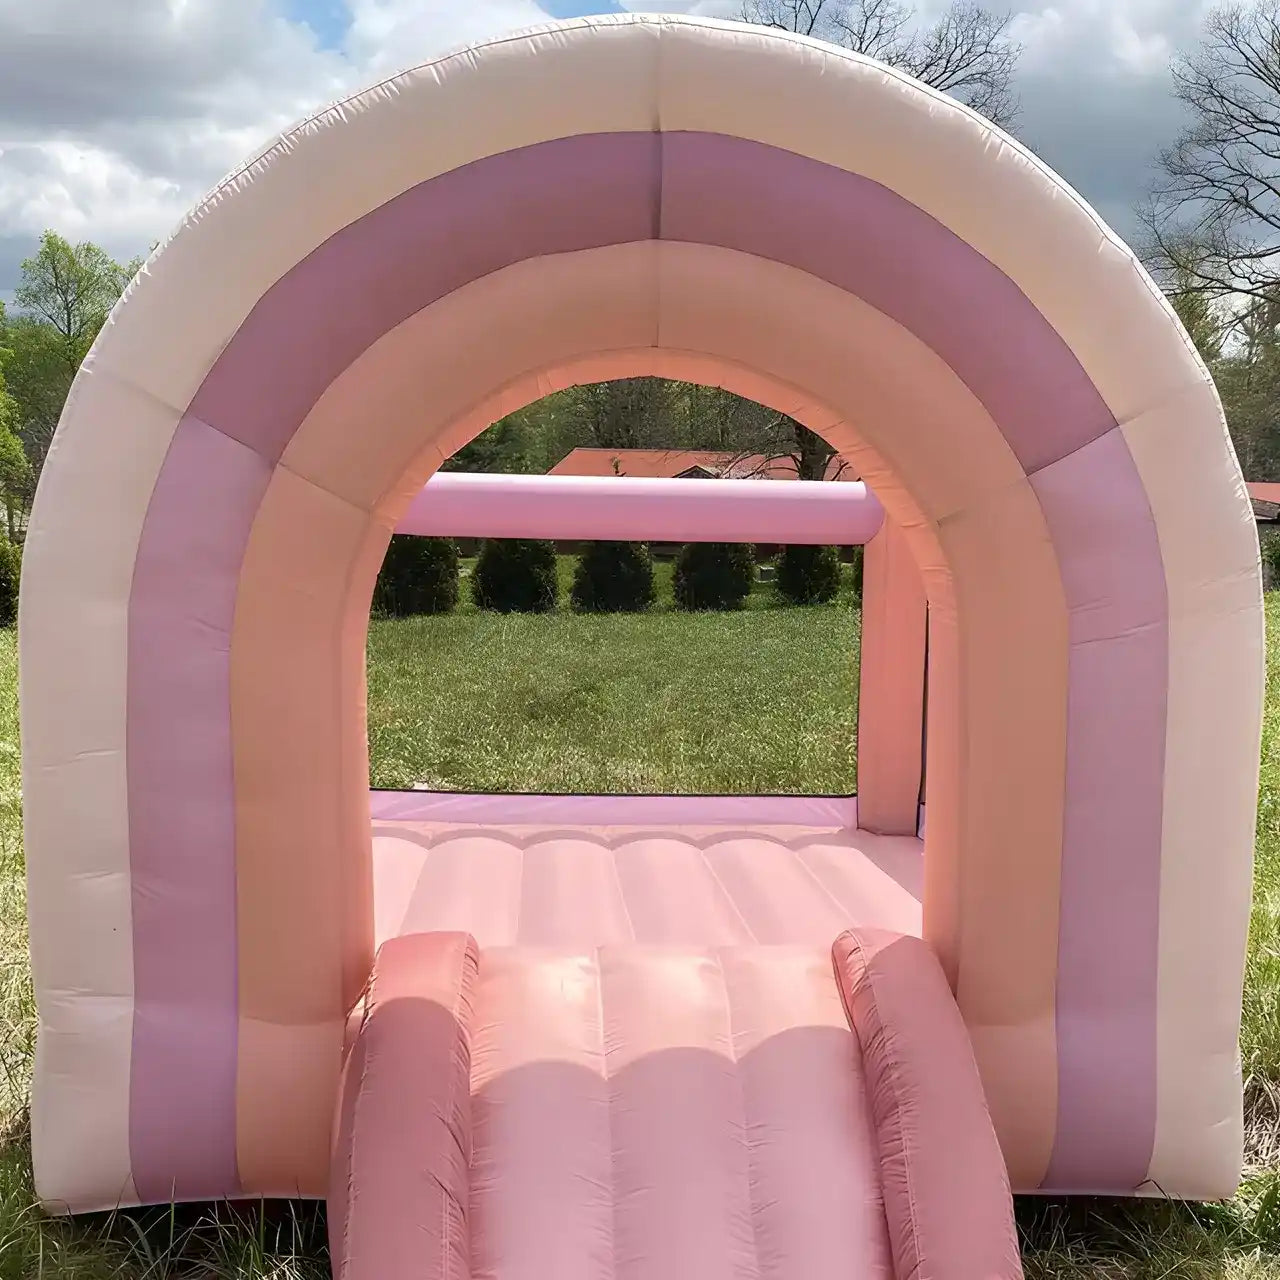 Small pink bounce house perfect for birthday party